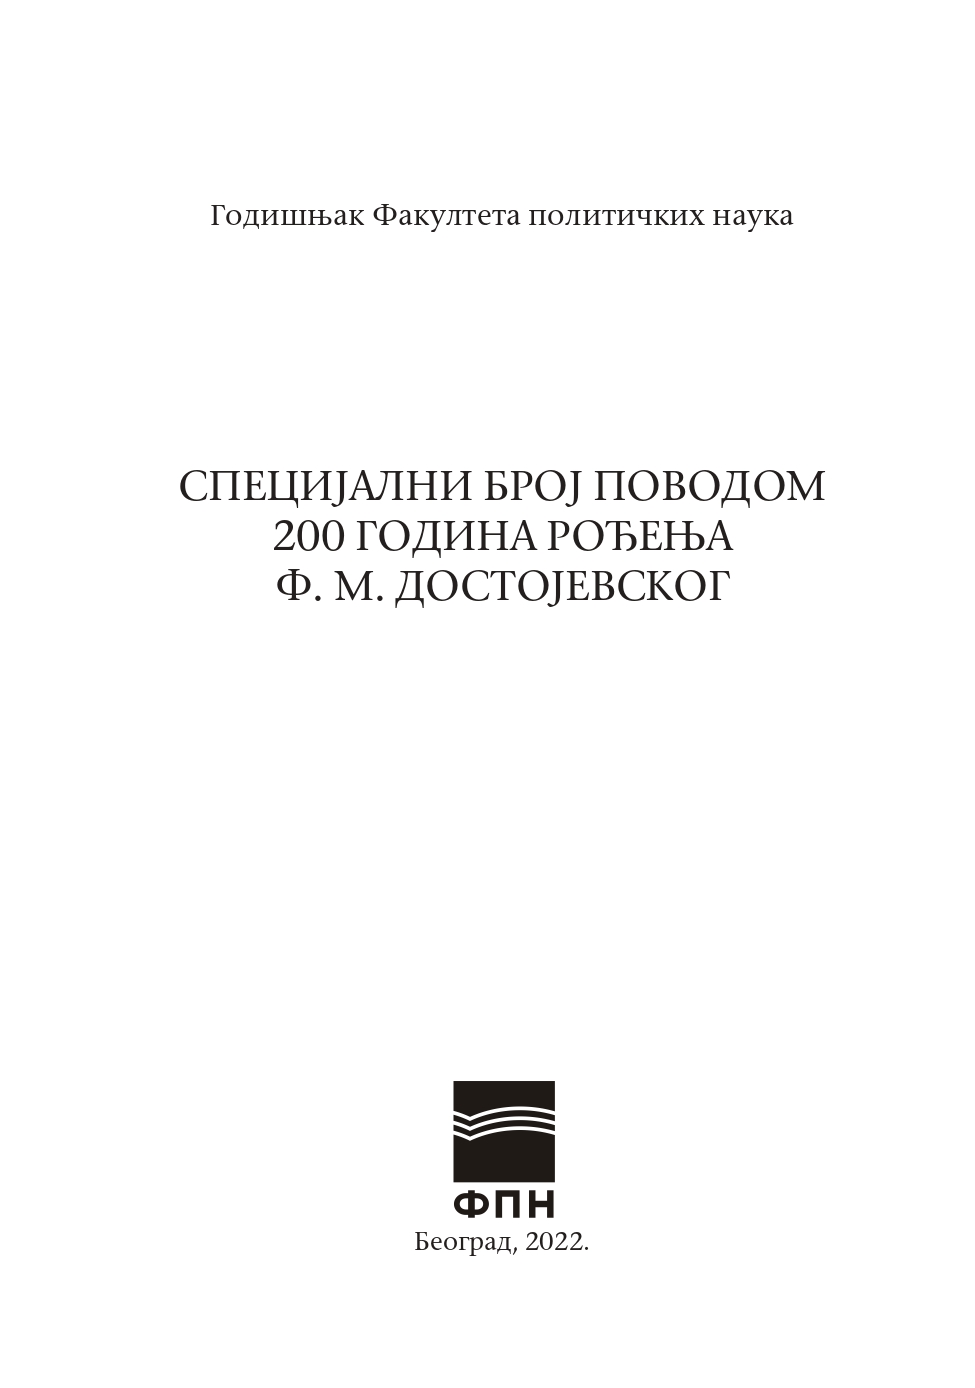 DE PERSONABUS NOVIS: THE GENEALOGY OF THE DEMONURGY OF THE ”UNDERGROUND” CHARACTERS OF DOSTOEVSKY’S DEMONS Cover Image